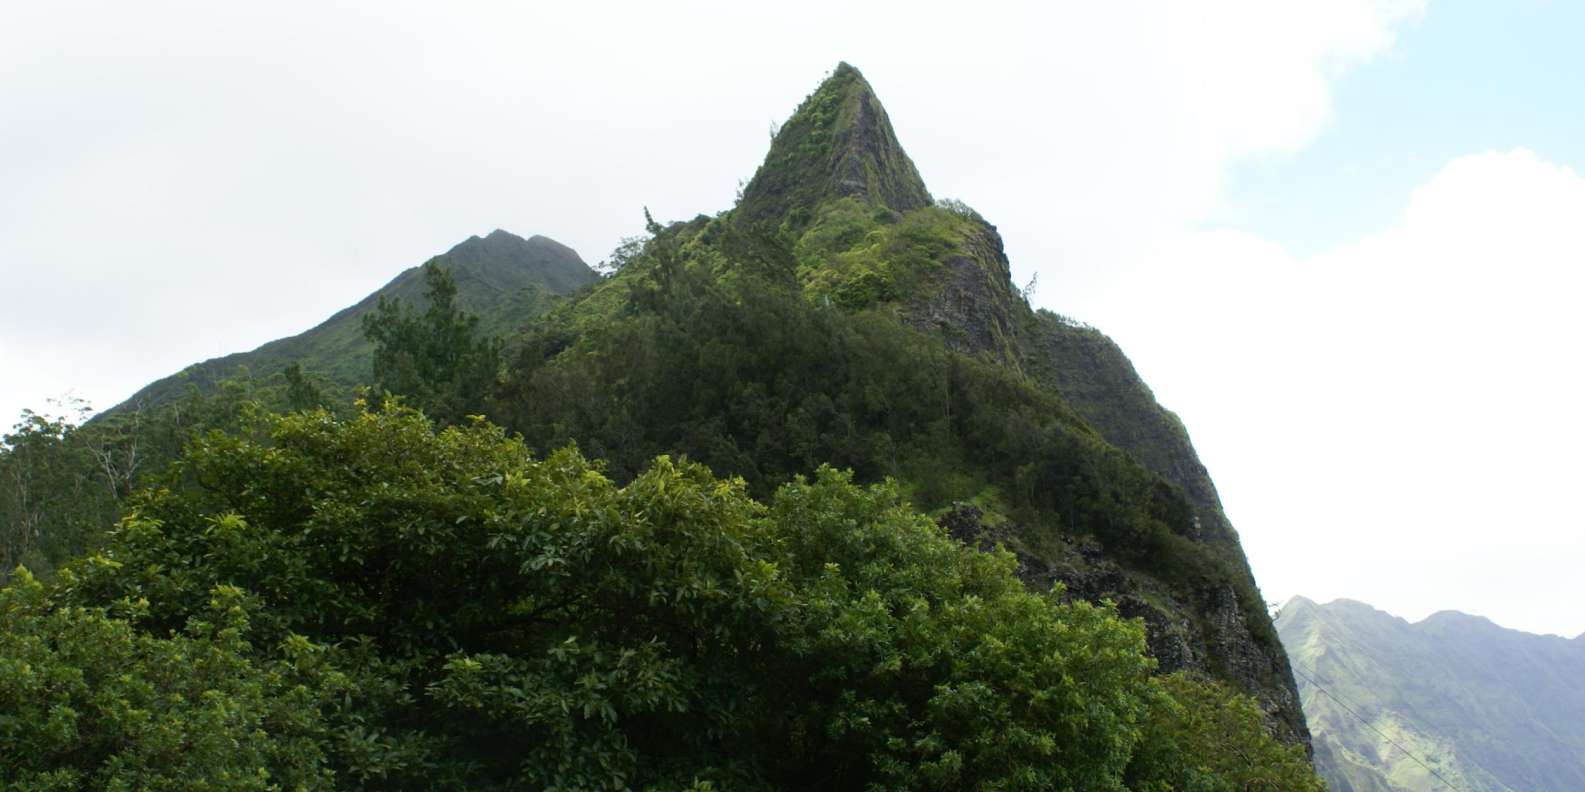 The BEST Nuuanu Pali Lookout Sightseeing On Wheels 2023 FREE